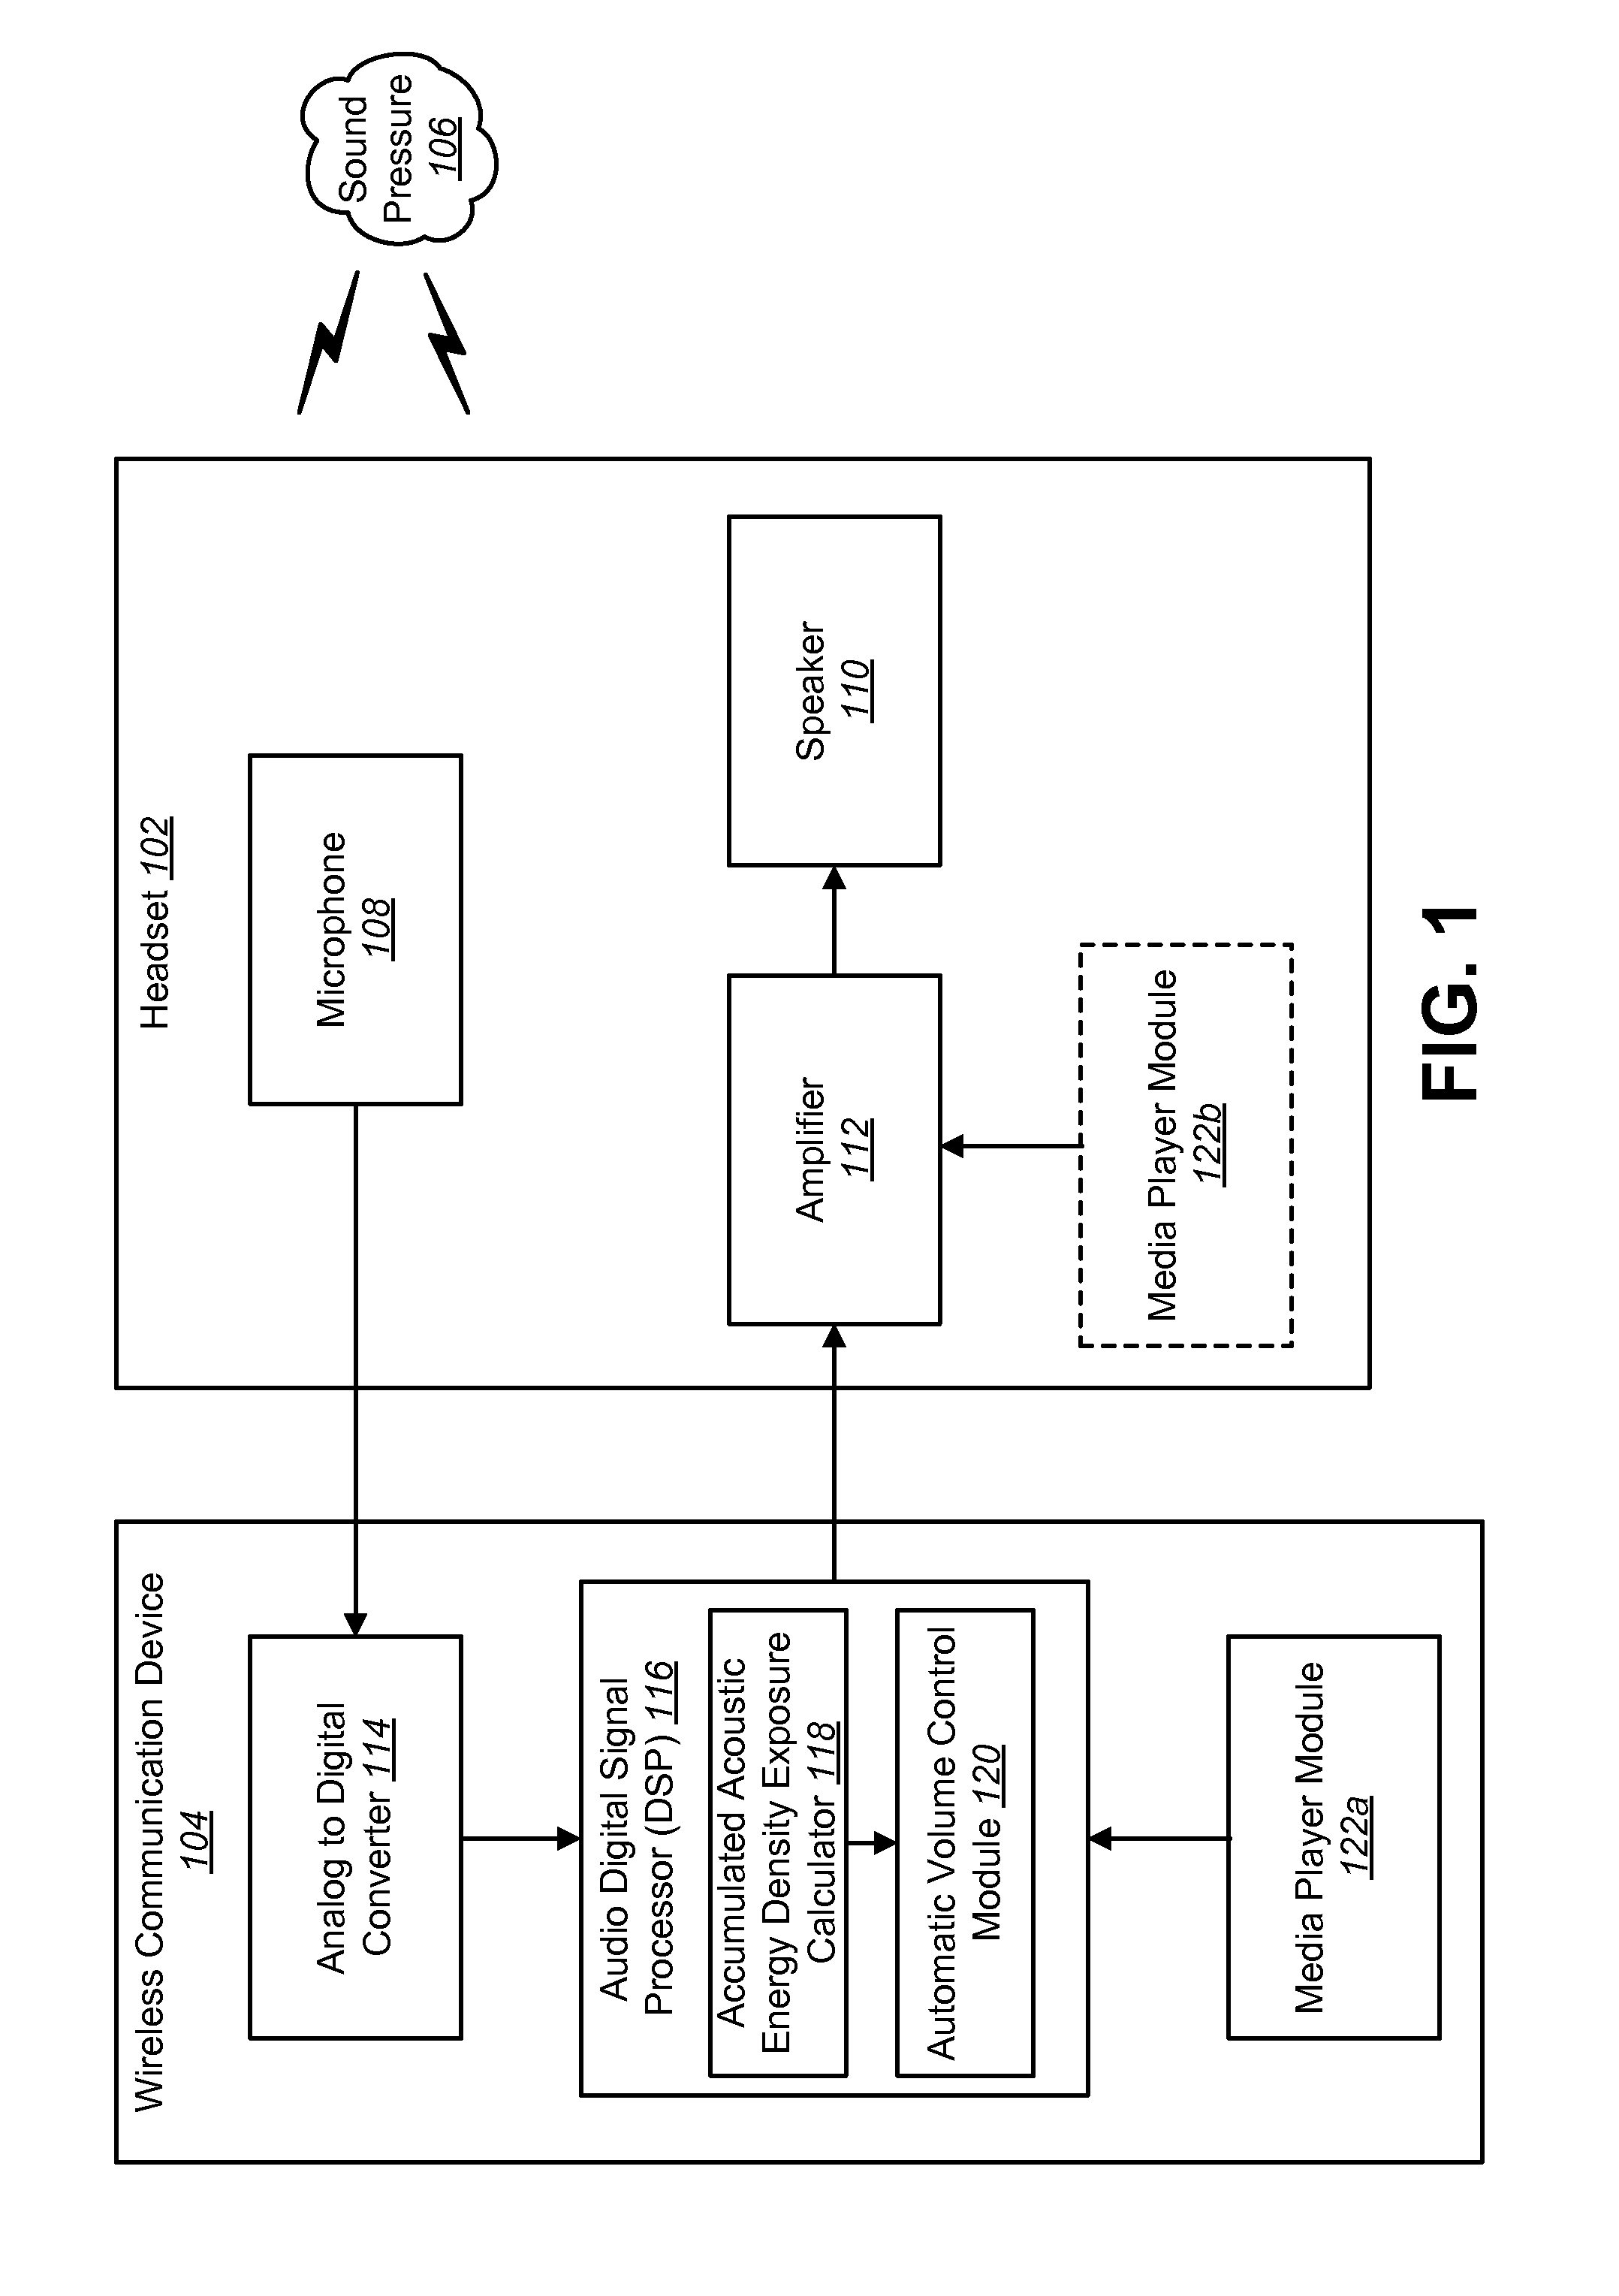 Automatic volume control based on acoustic energy exposure